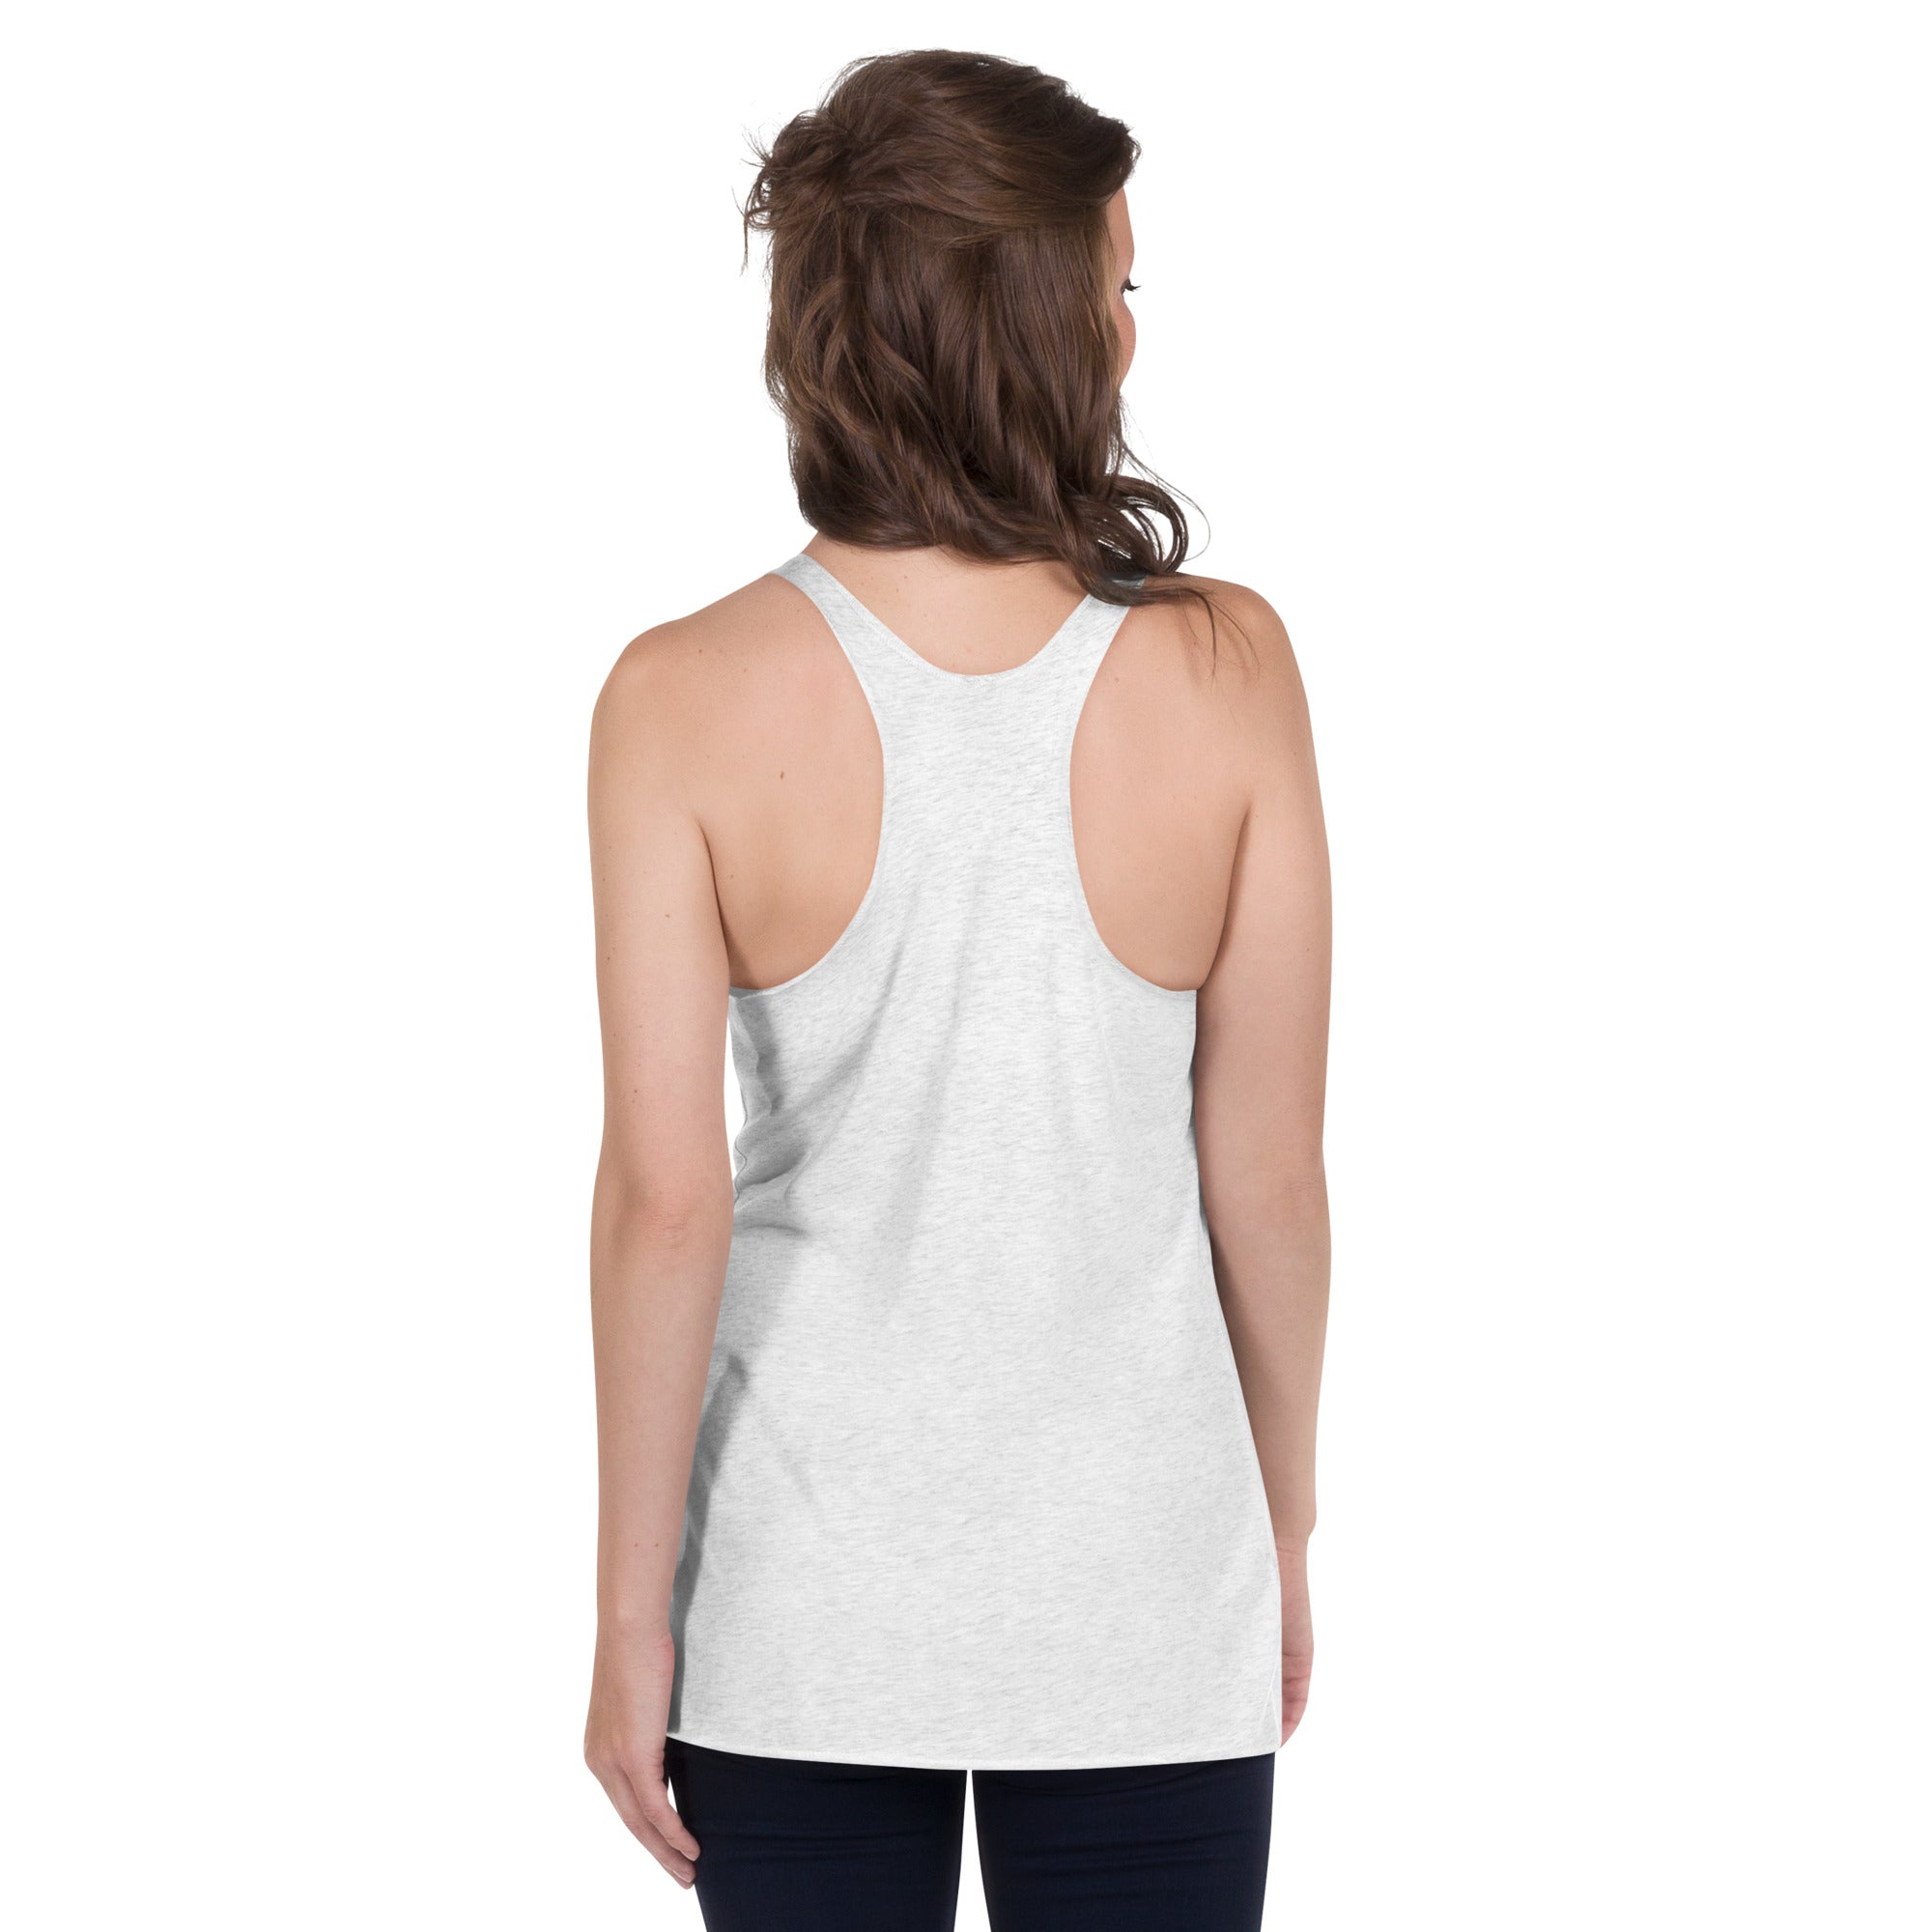 Our Most Valuable Natural Resource Freedom Women's Racerback Tank